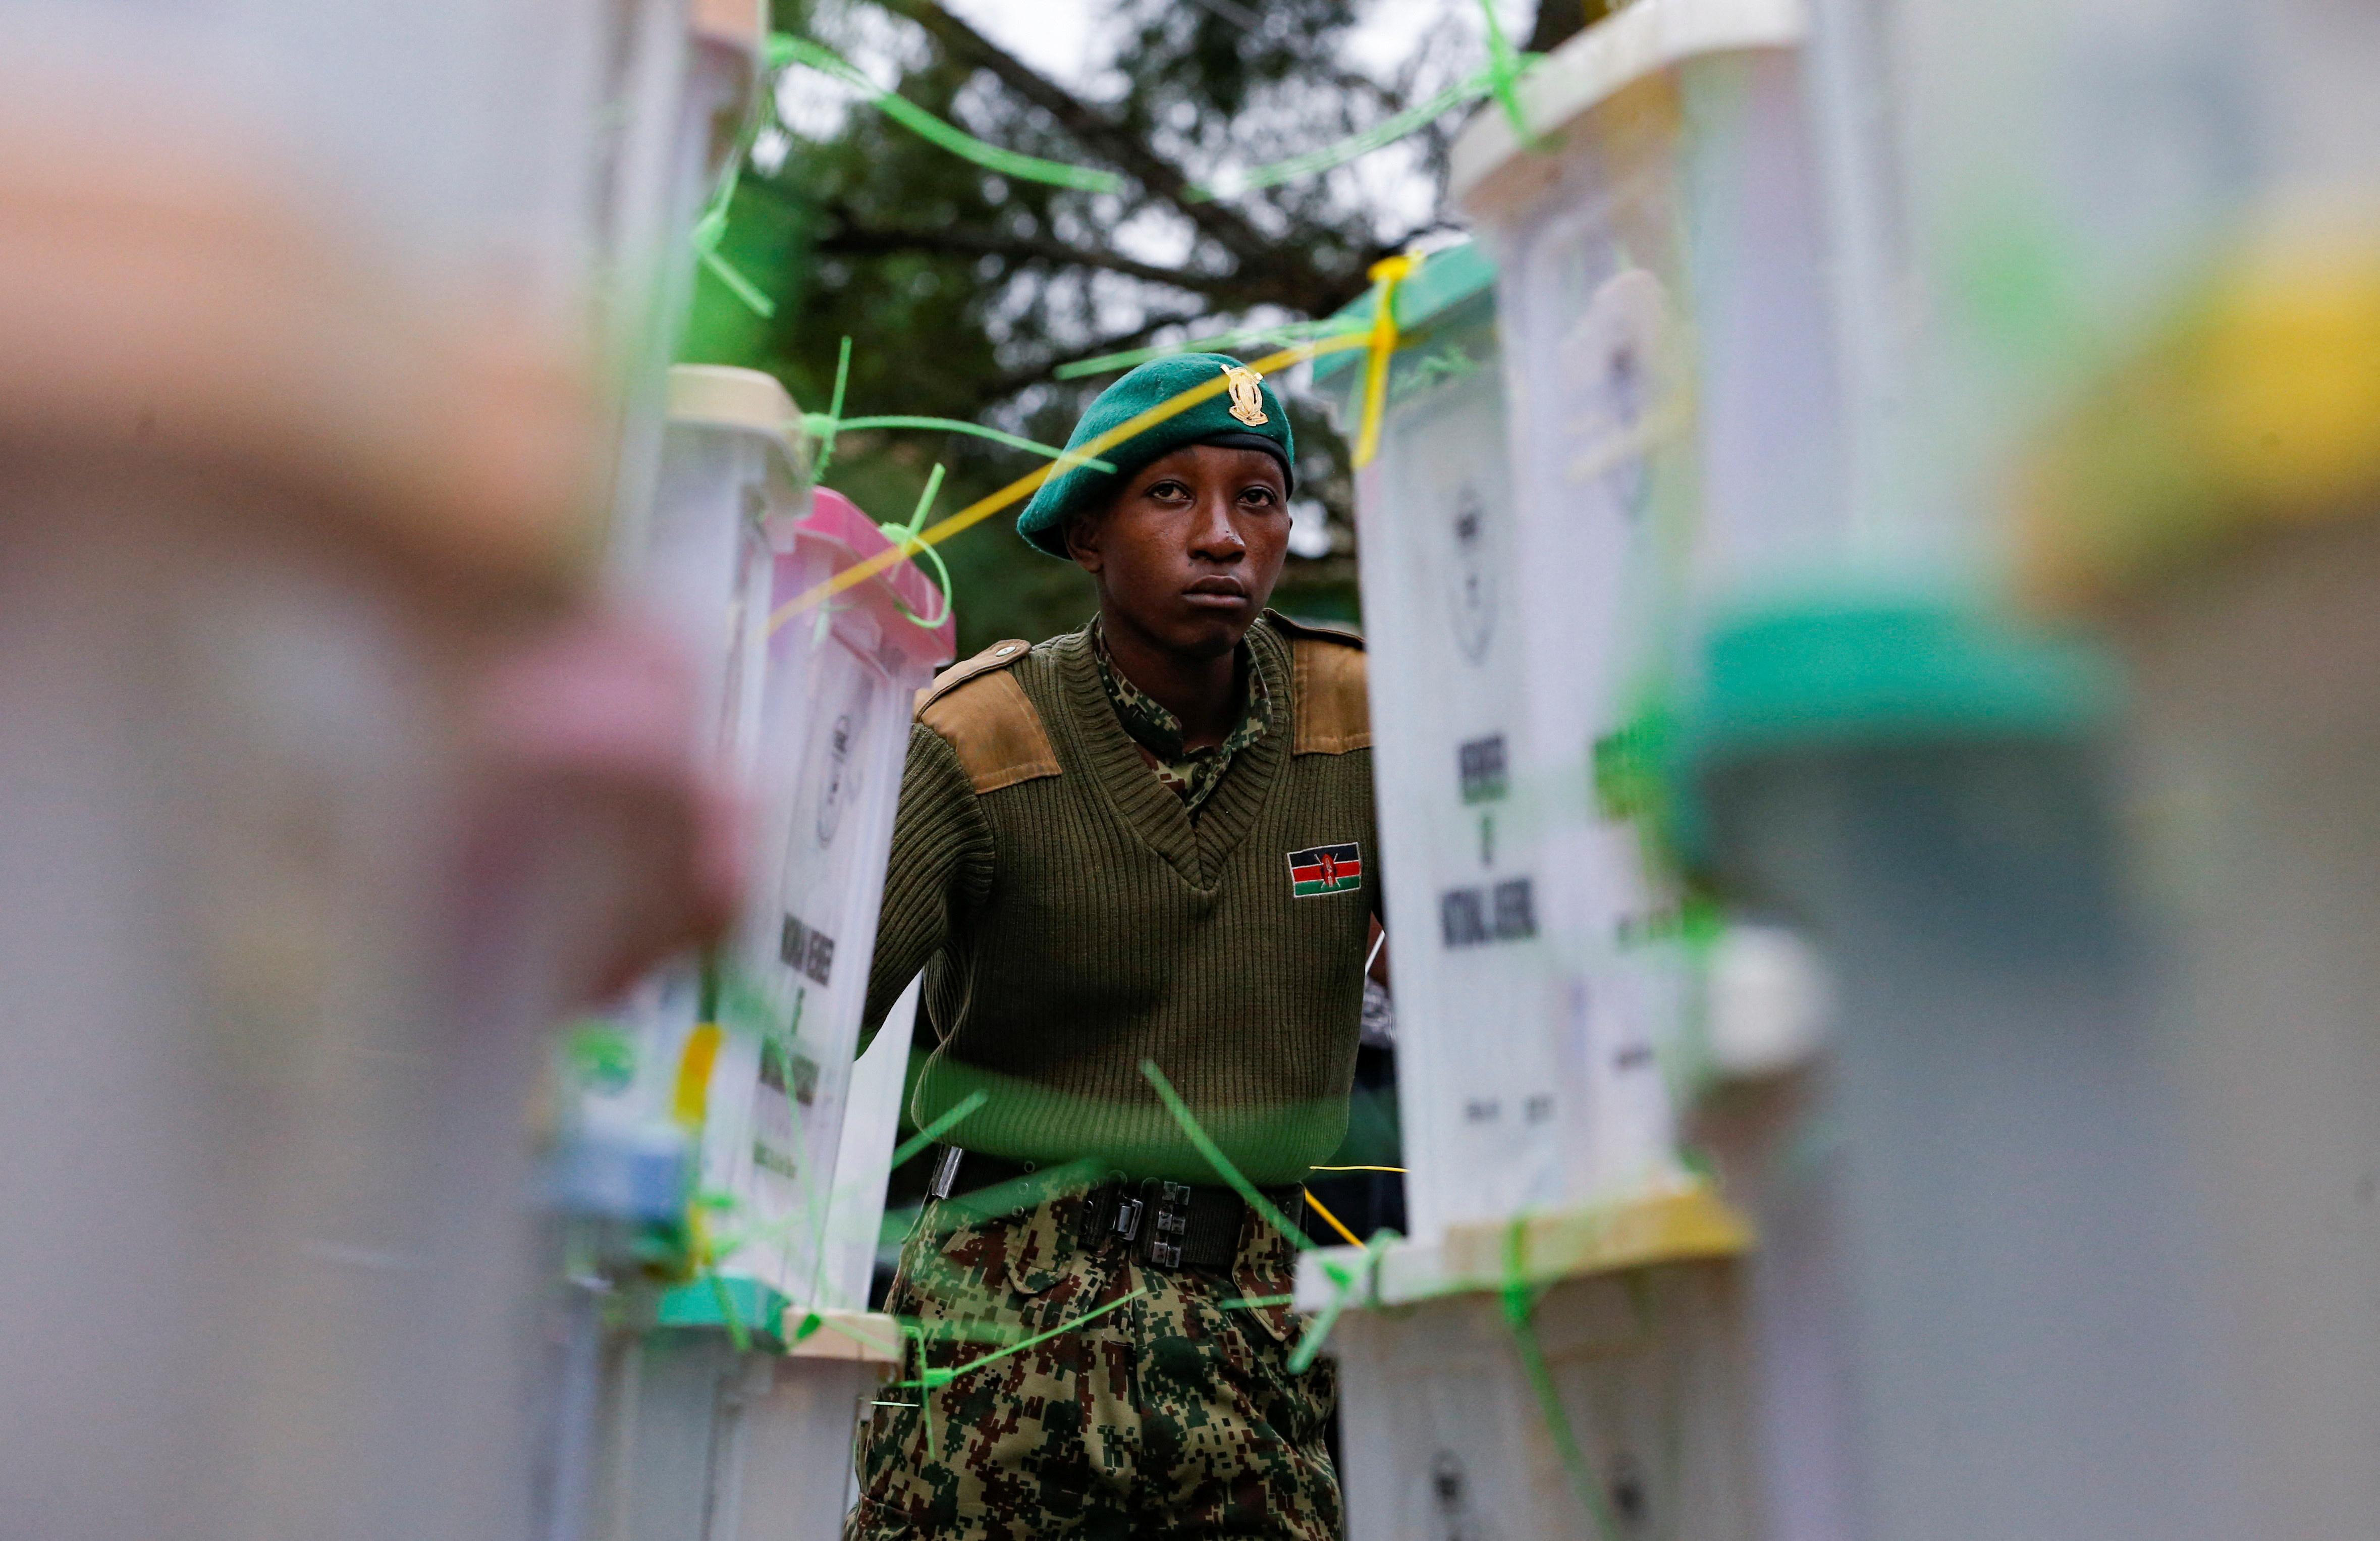 Kenya's electoral commission relays election results in Nairobi